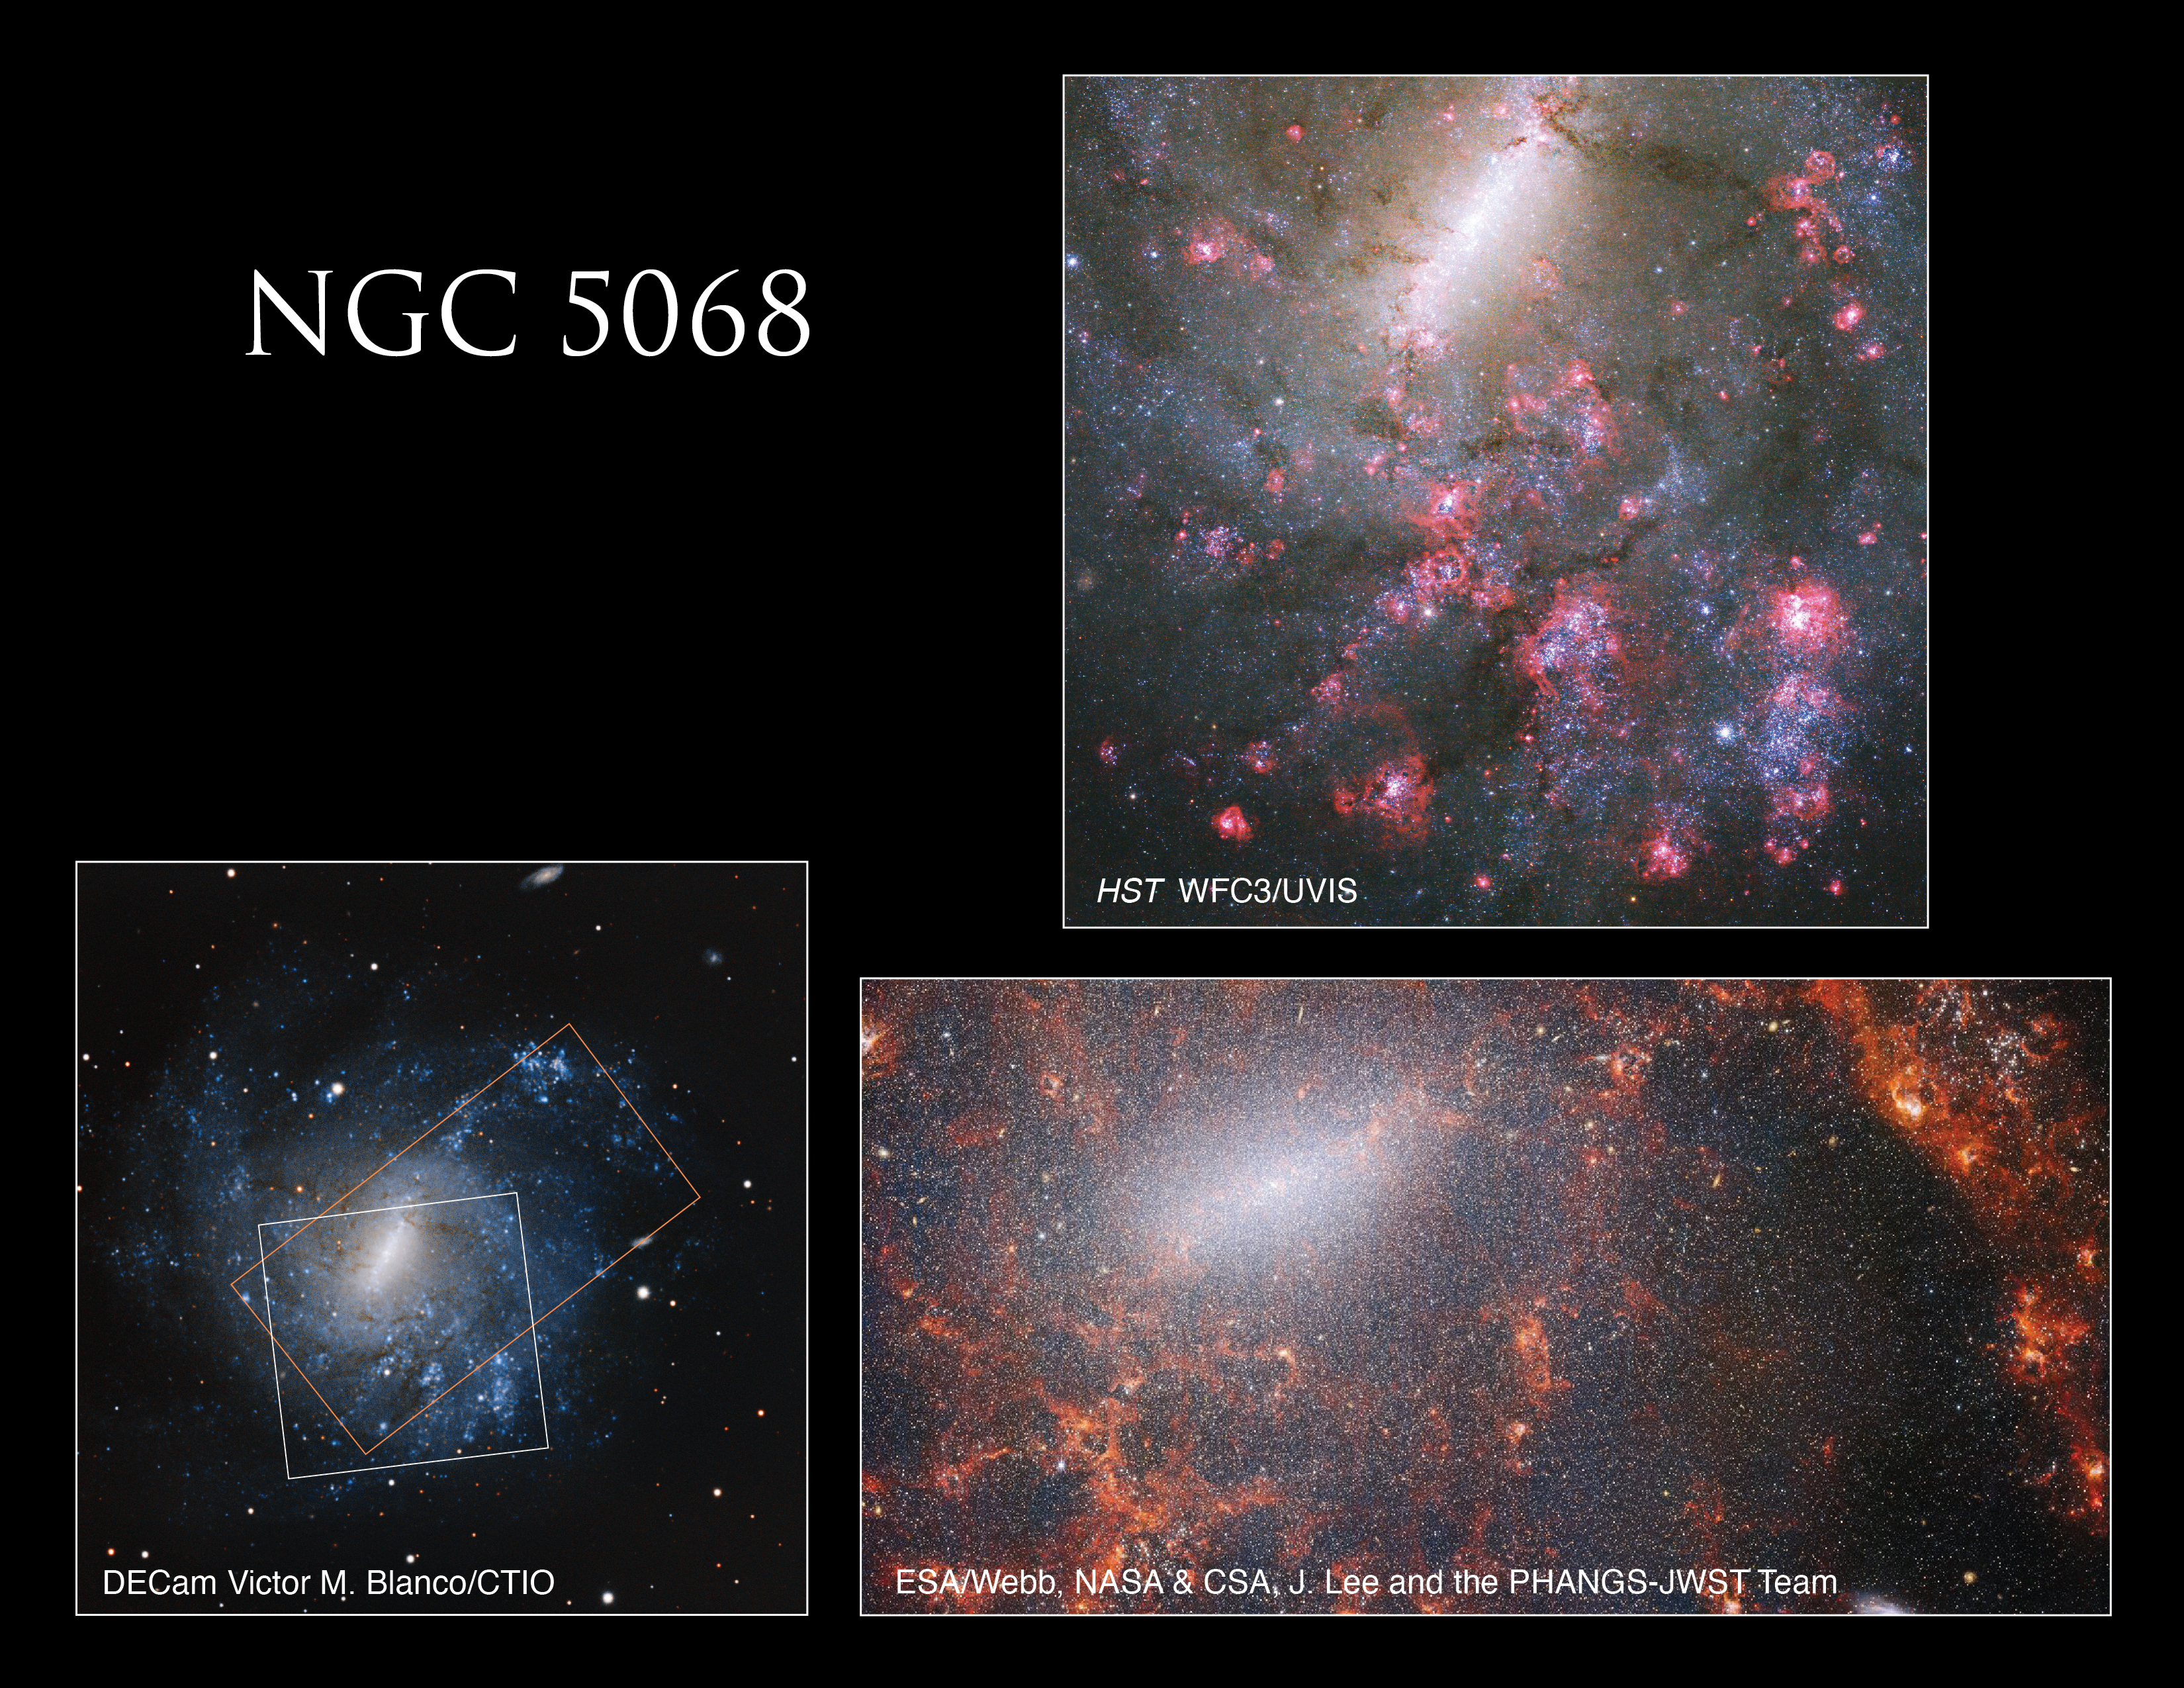 Three images of the galaxy NGC 5068 on a black background. The Hubble image in ultraviolet, visible, and near-infrared light (upper-right) reveals the galaxy's bright-white central bar of stars and tendrils of its spiral arms in hues of pink and blue below. The Webb image in infrared (lower-right) reveals the bright-white central bar and orange details of the galaxy's inner spiral arms. The lower-left image is a wide-field image of NGC 5068 that holds boxes that outline the locations of the Hubble and Webb images.